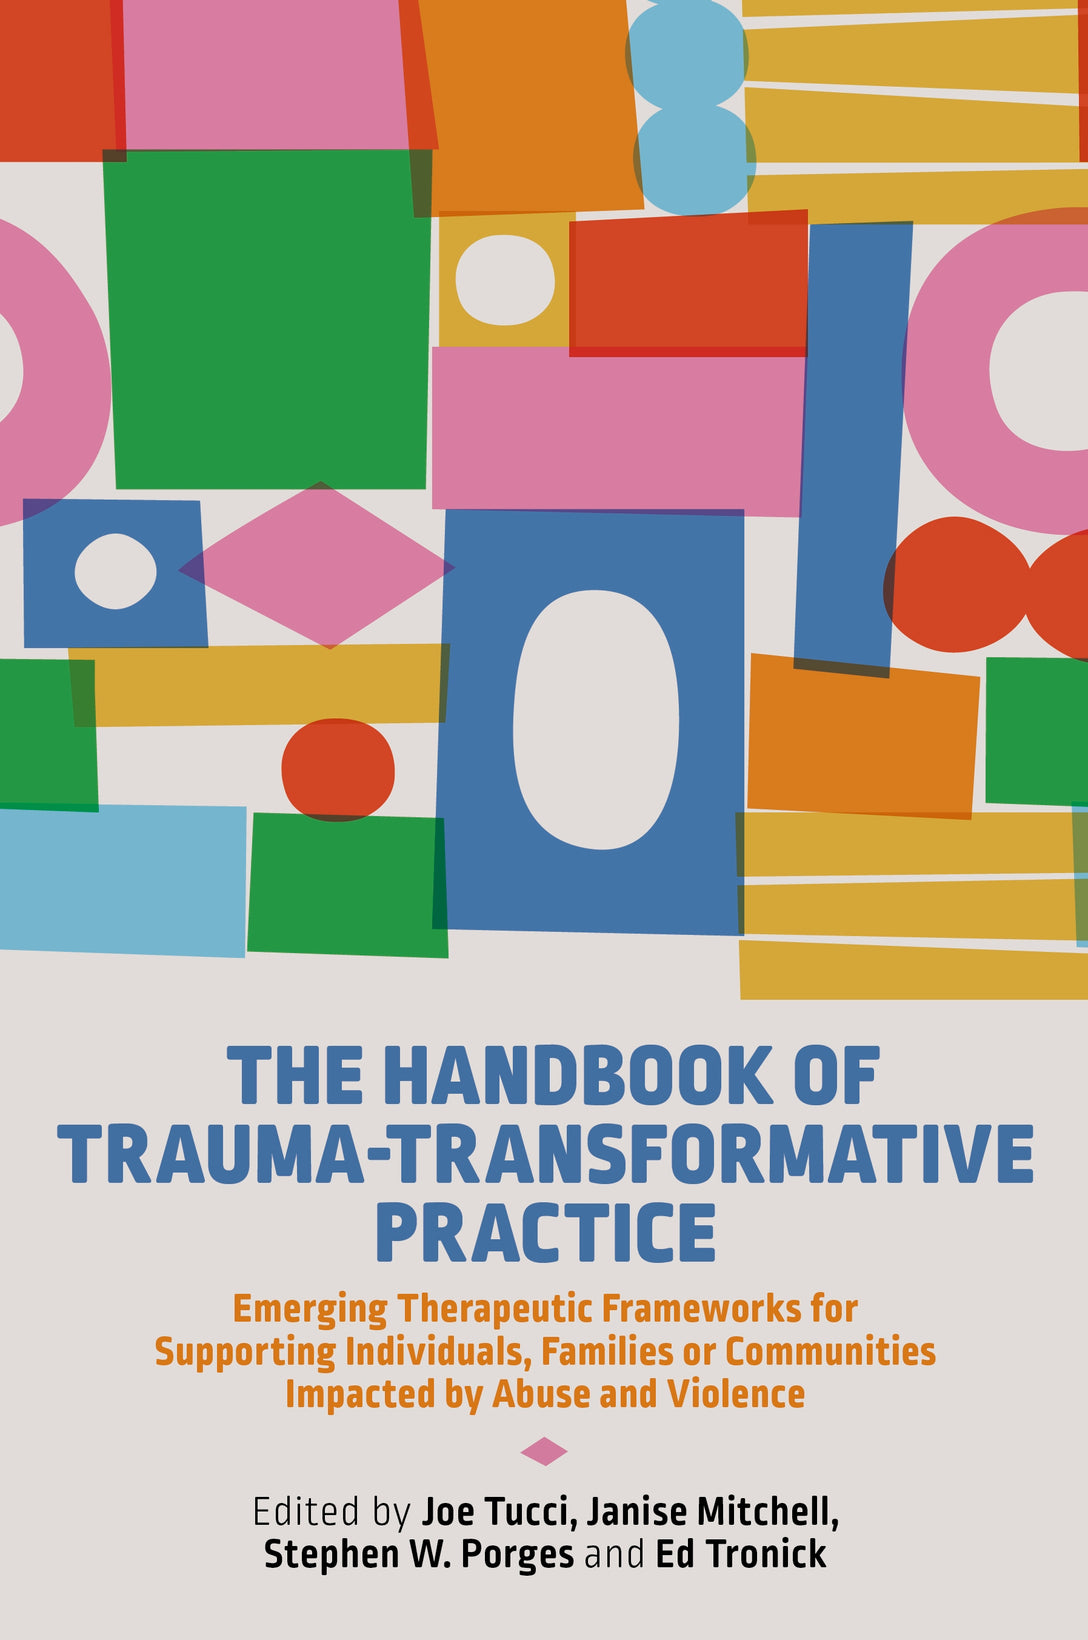 The Handbook of Trauma-Transformative Practice by Stephen W. Porges, Janise Mitchell, Joe Tucci, Edward C Tronick, No Author Listed